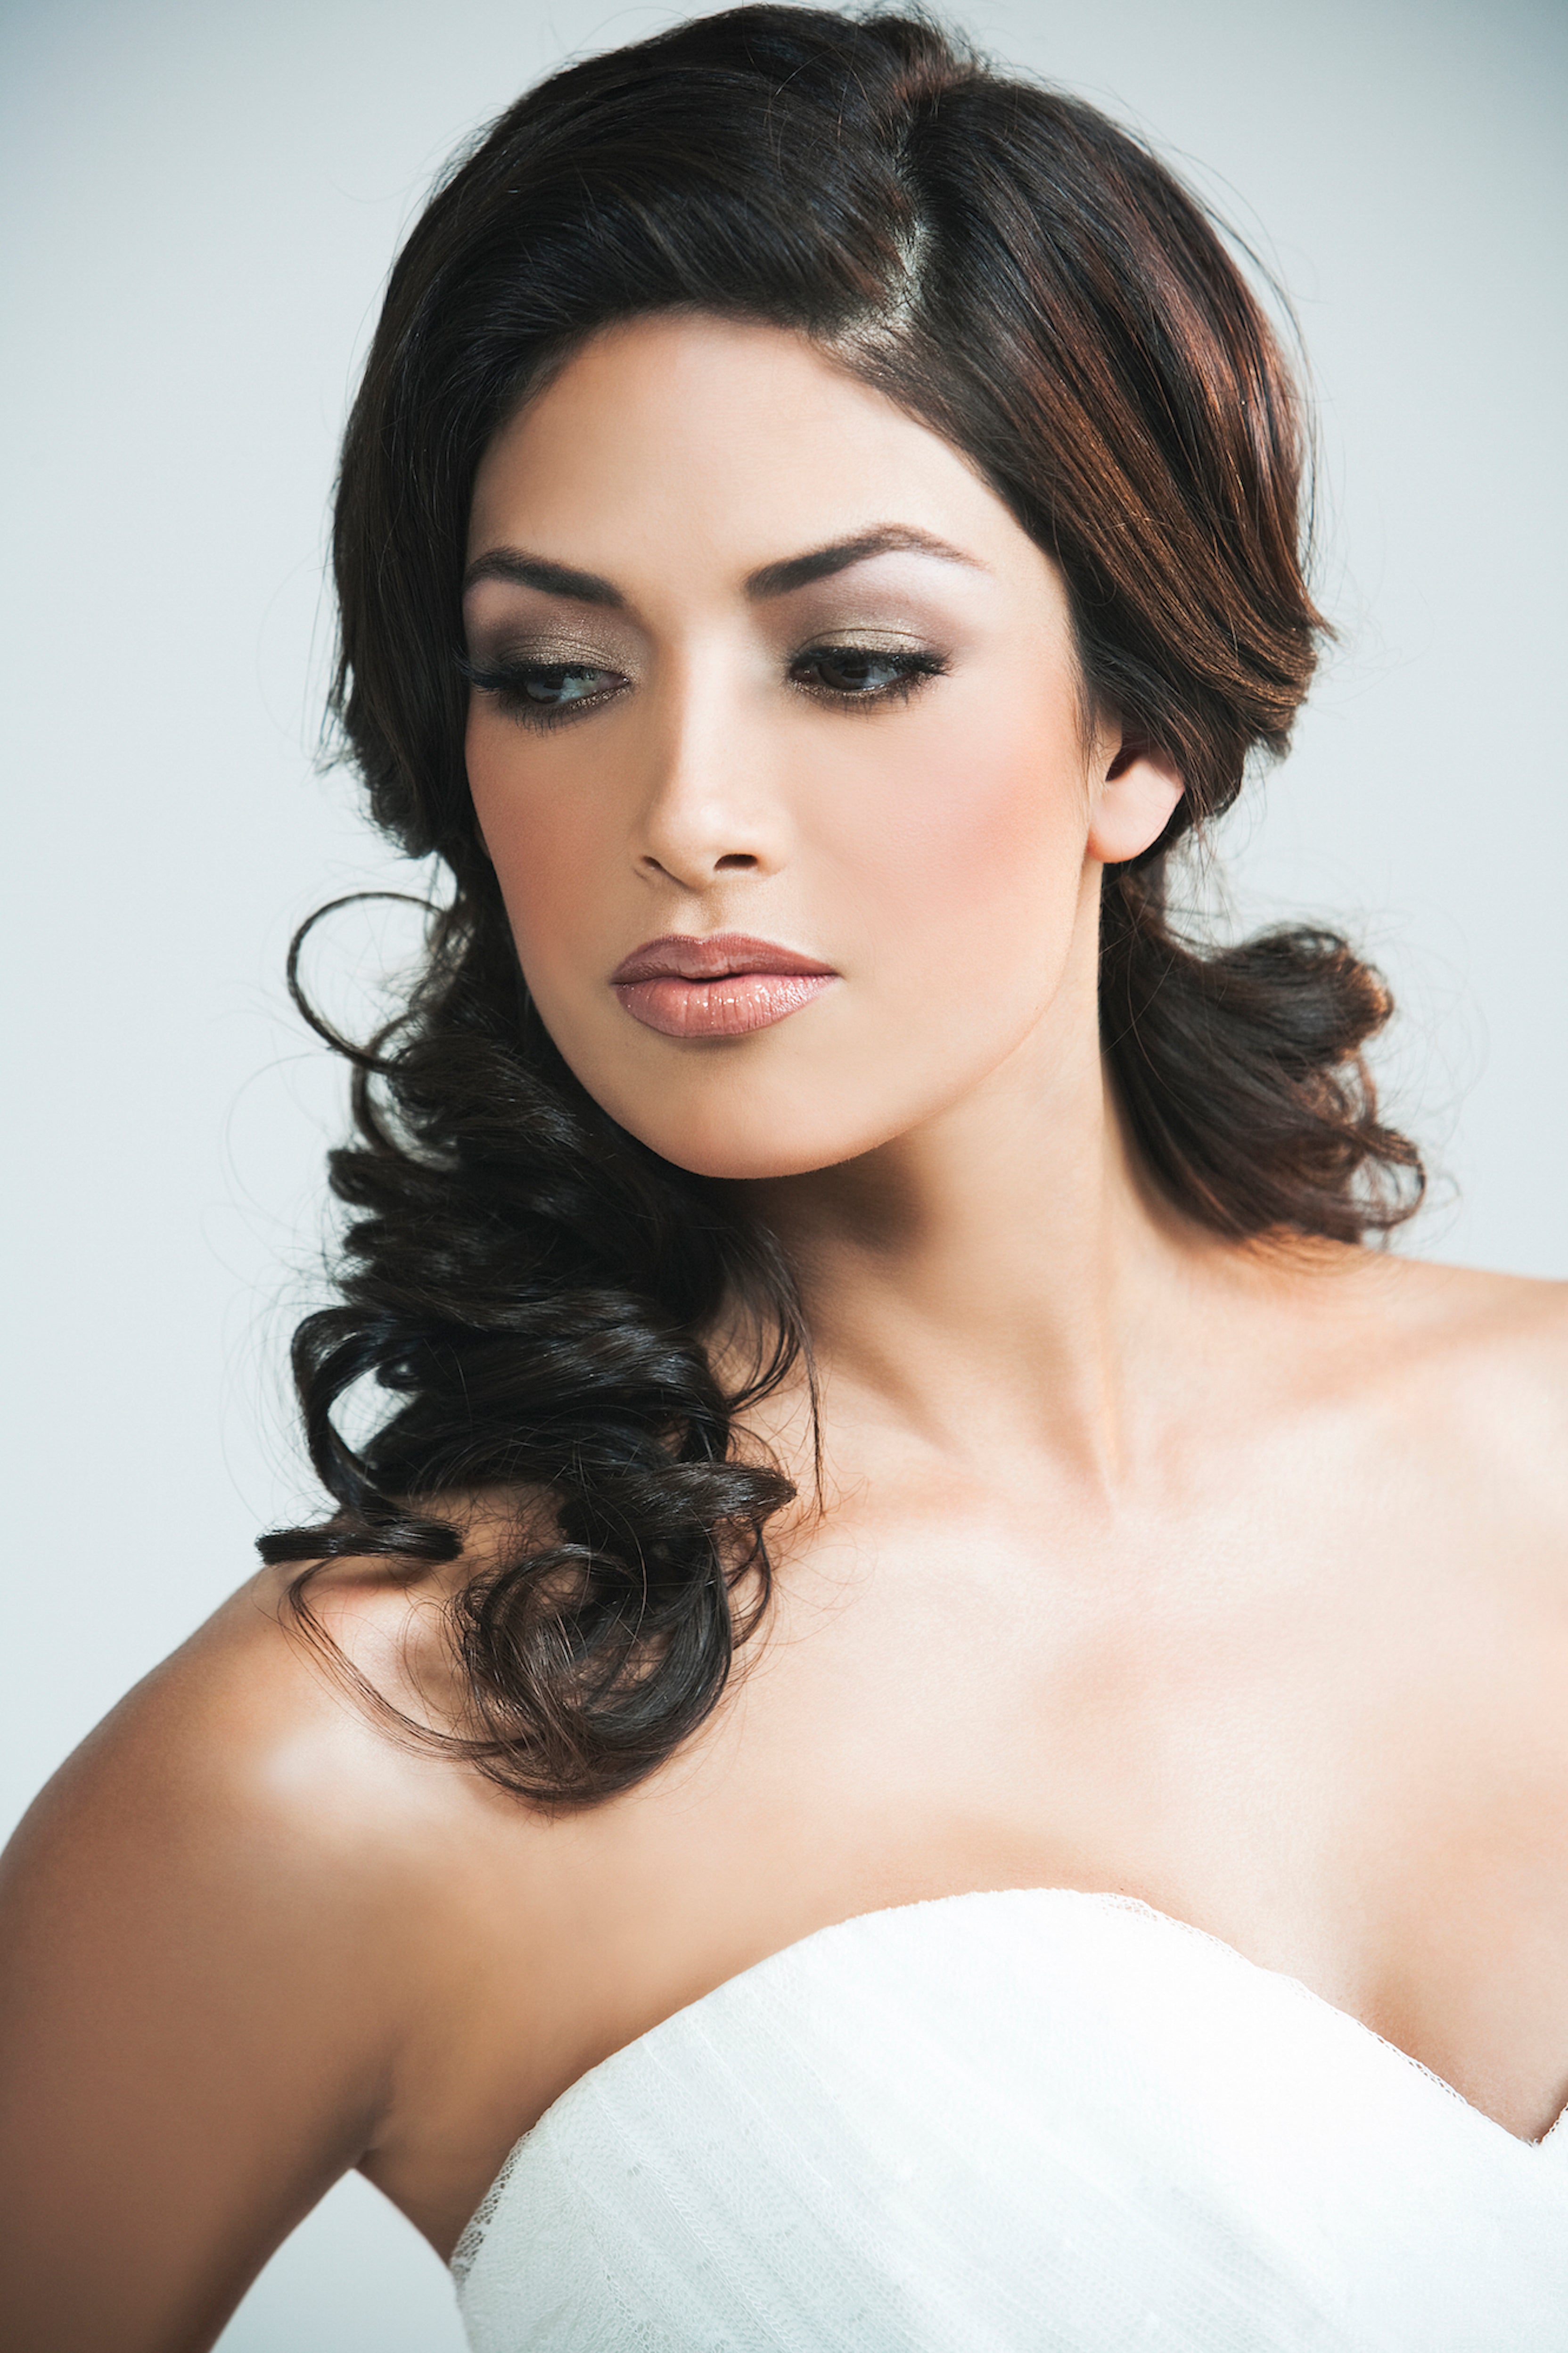 Image of Nicole Phelps. Makeup by Valerie. Valerie created a more dramatic bridal looking using Celine Paw Print Eyeshadow kit, Golden Sherbet Cream Eyeshadow, Sorrell Lip Liner, and Cougar Lipgloss.